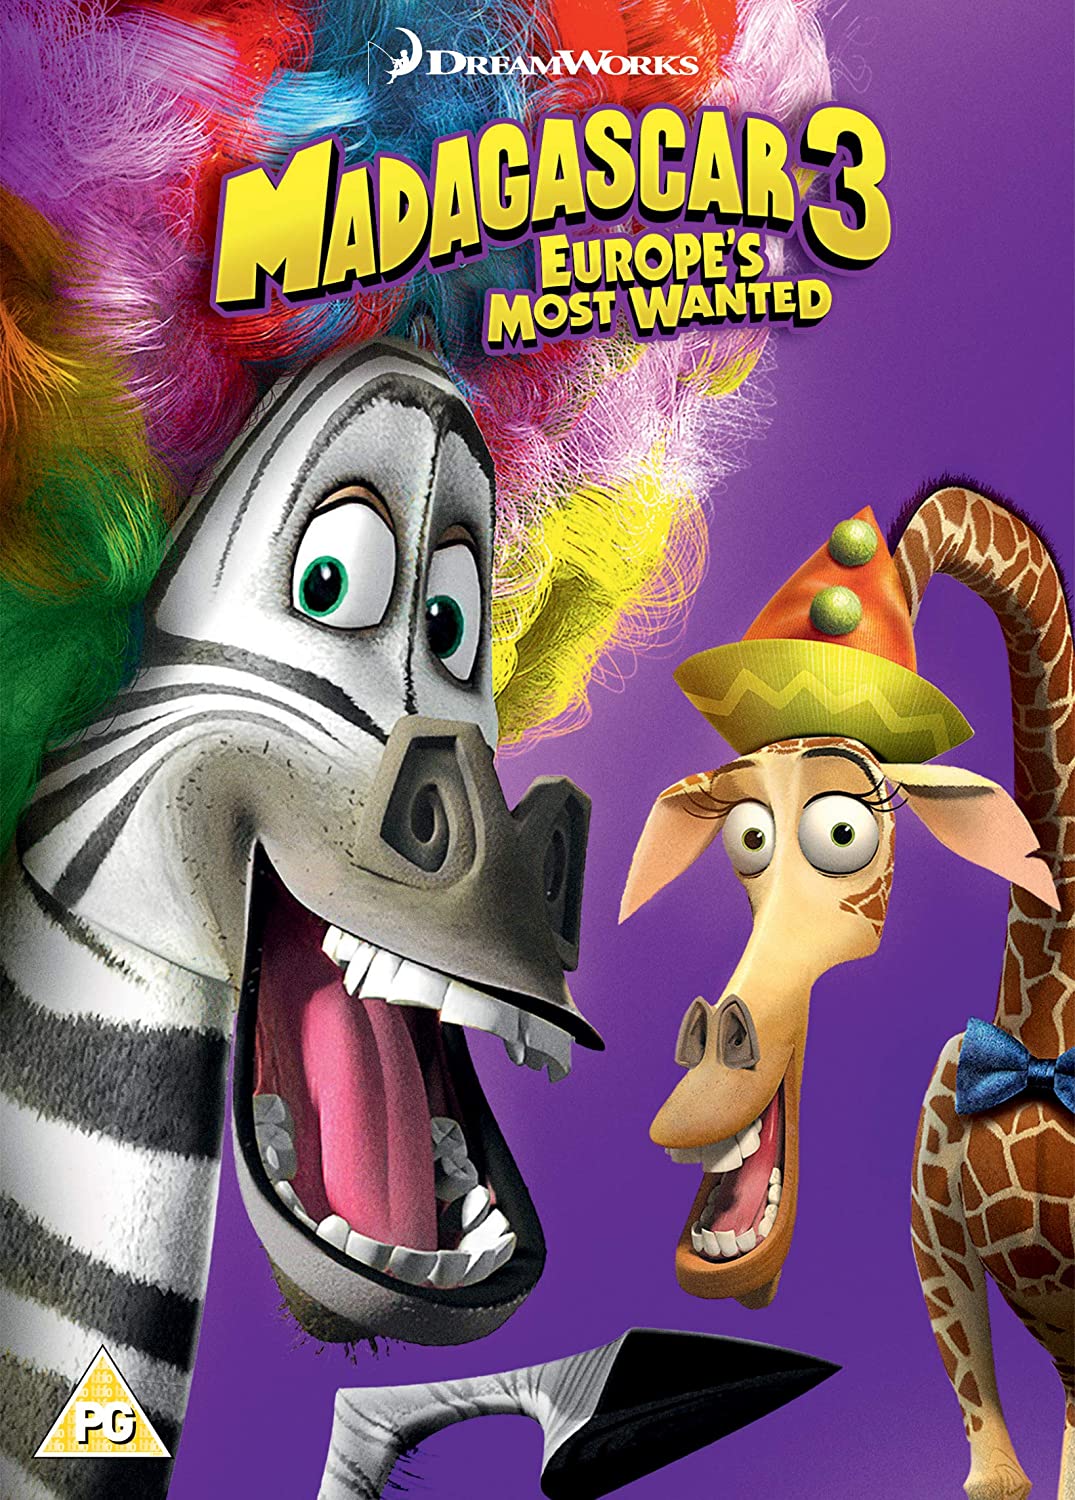 Madagascar 3: Europe's Most Wanted [2012] (Dreamworks) (DVD)